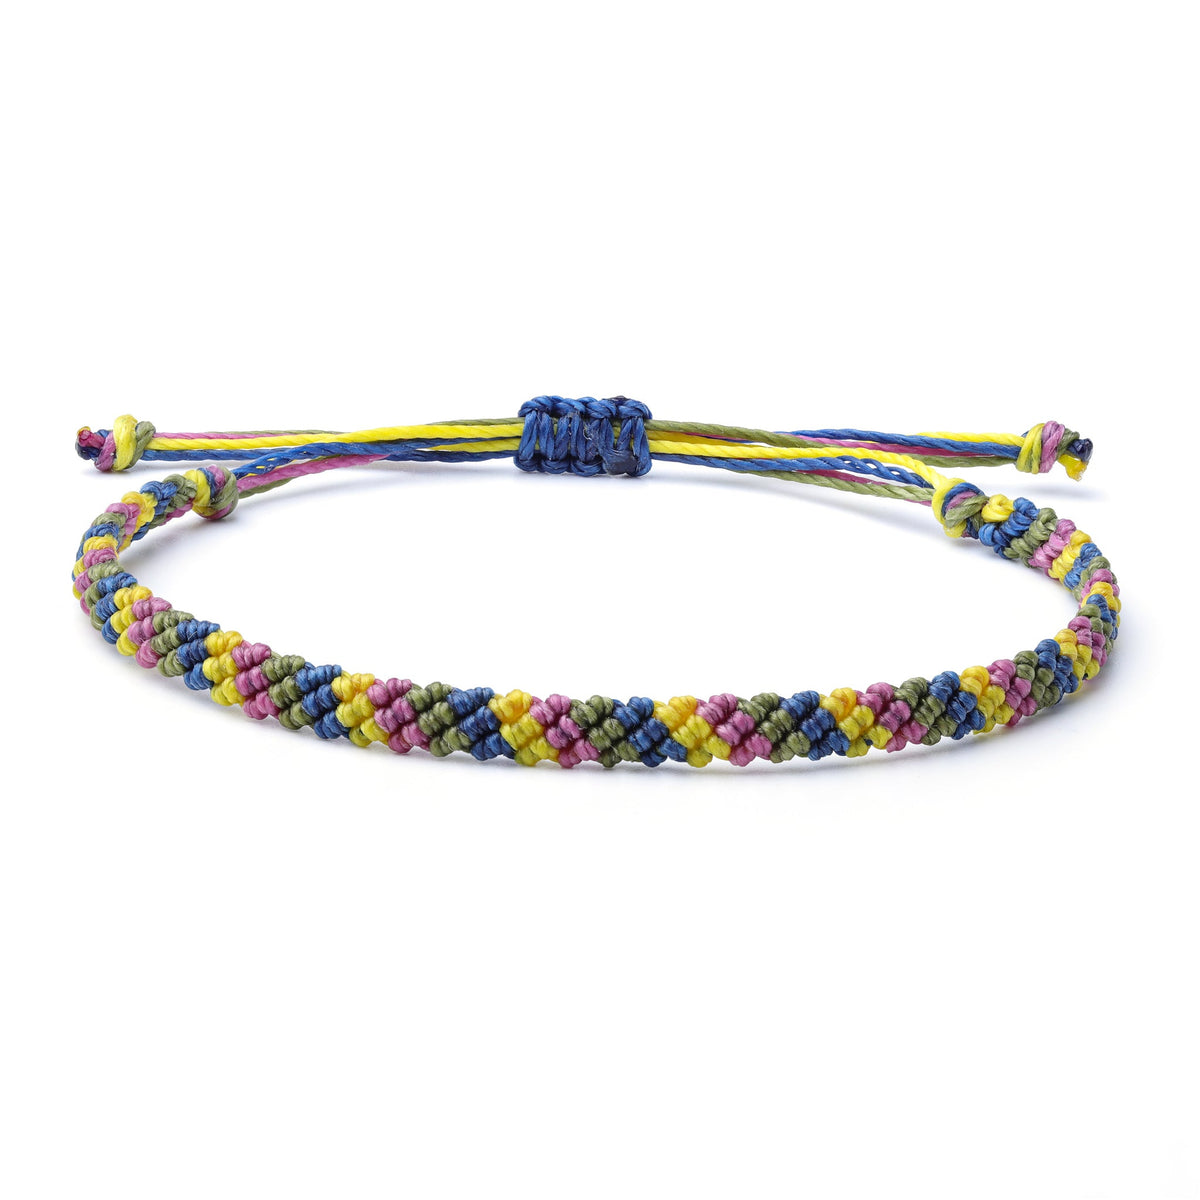 Multi Color Braided Waterproof Bracelet with wax coated thread, colors yellow, pink, blue, green